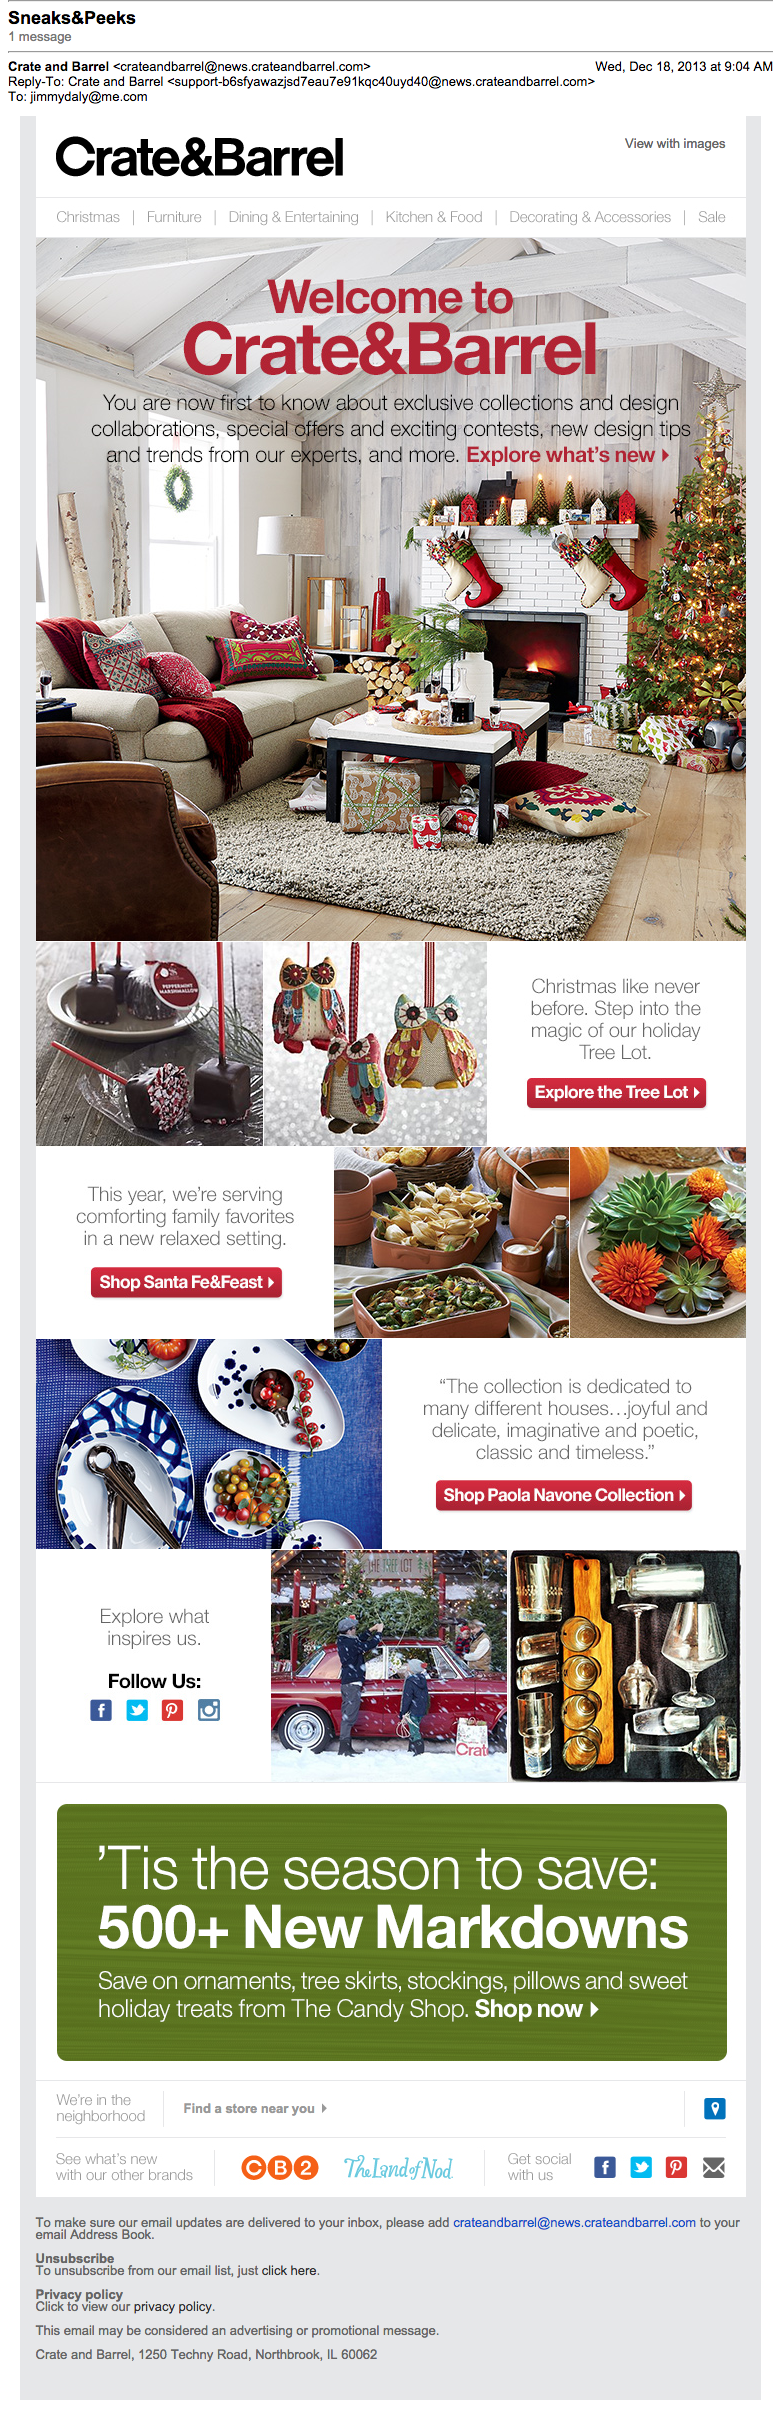 Screenshot of a marketing email from Crate&Barrel advertising Christmas decorations.